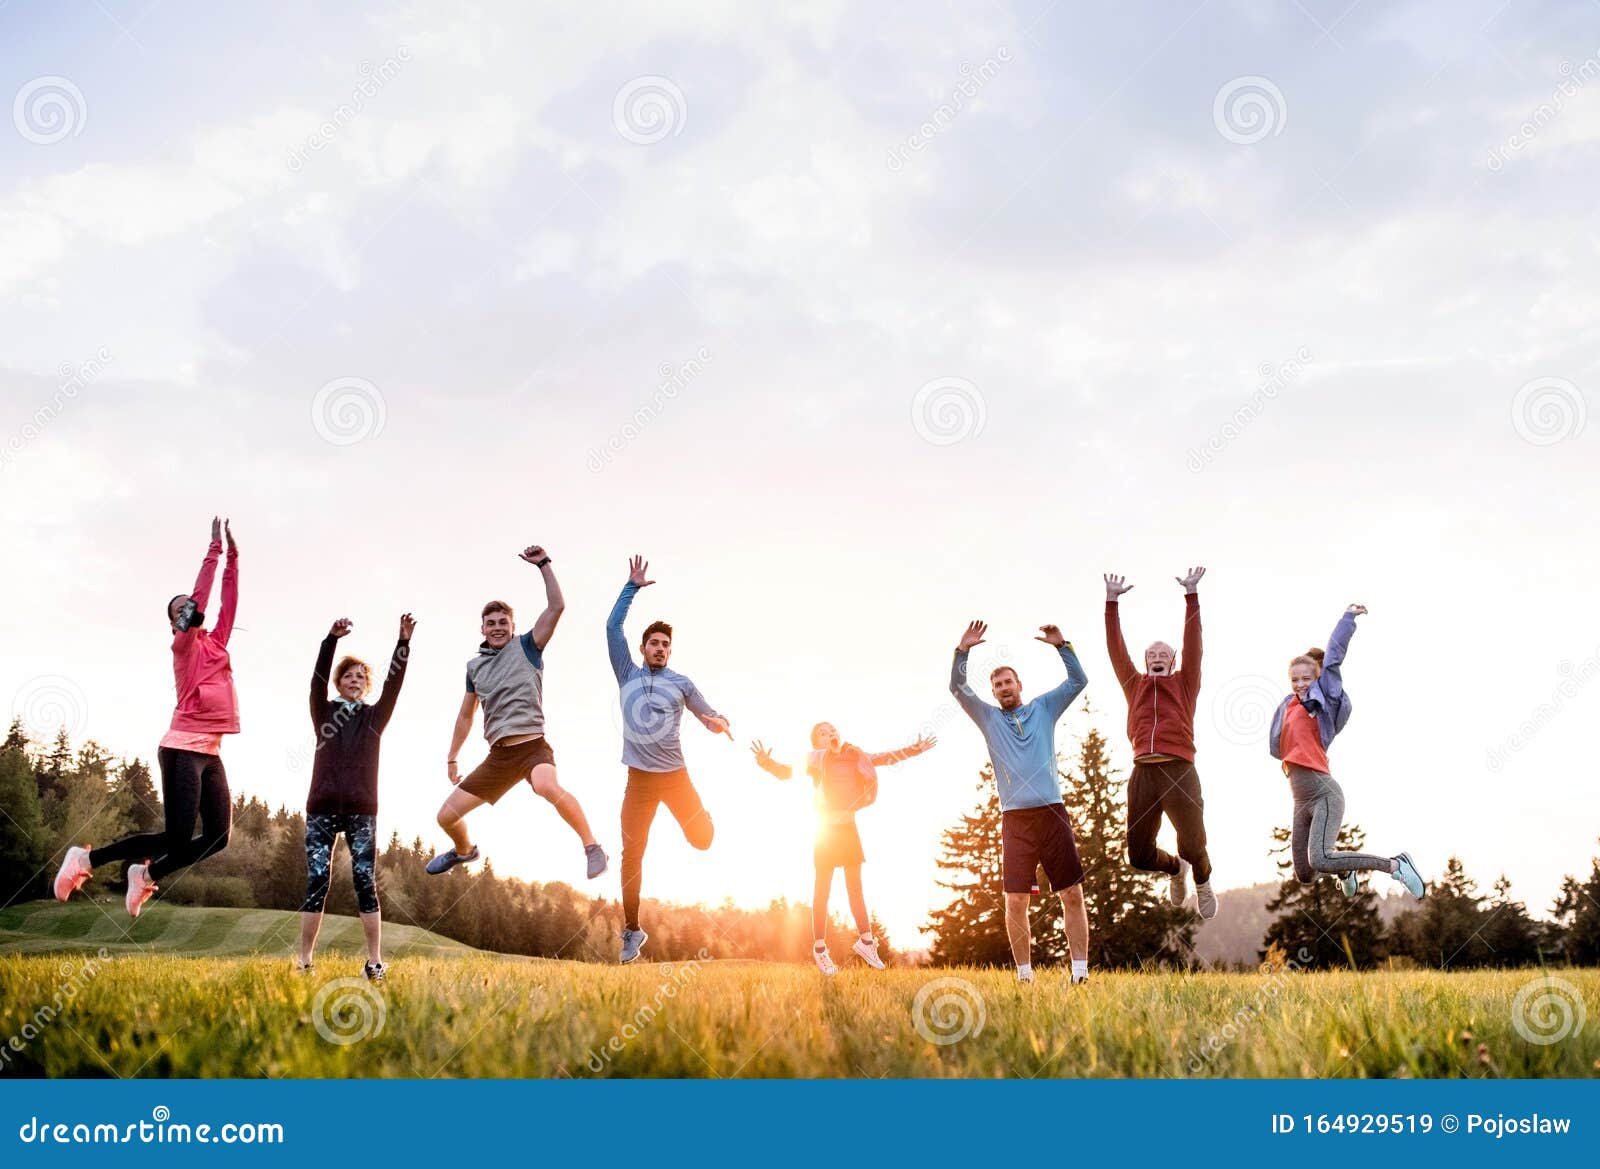 large group of fit and active people jumping after doing exercise in nature.